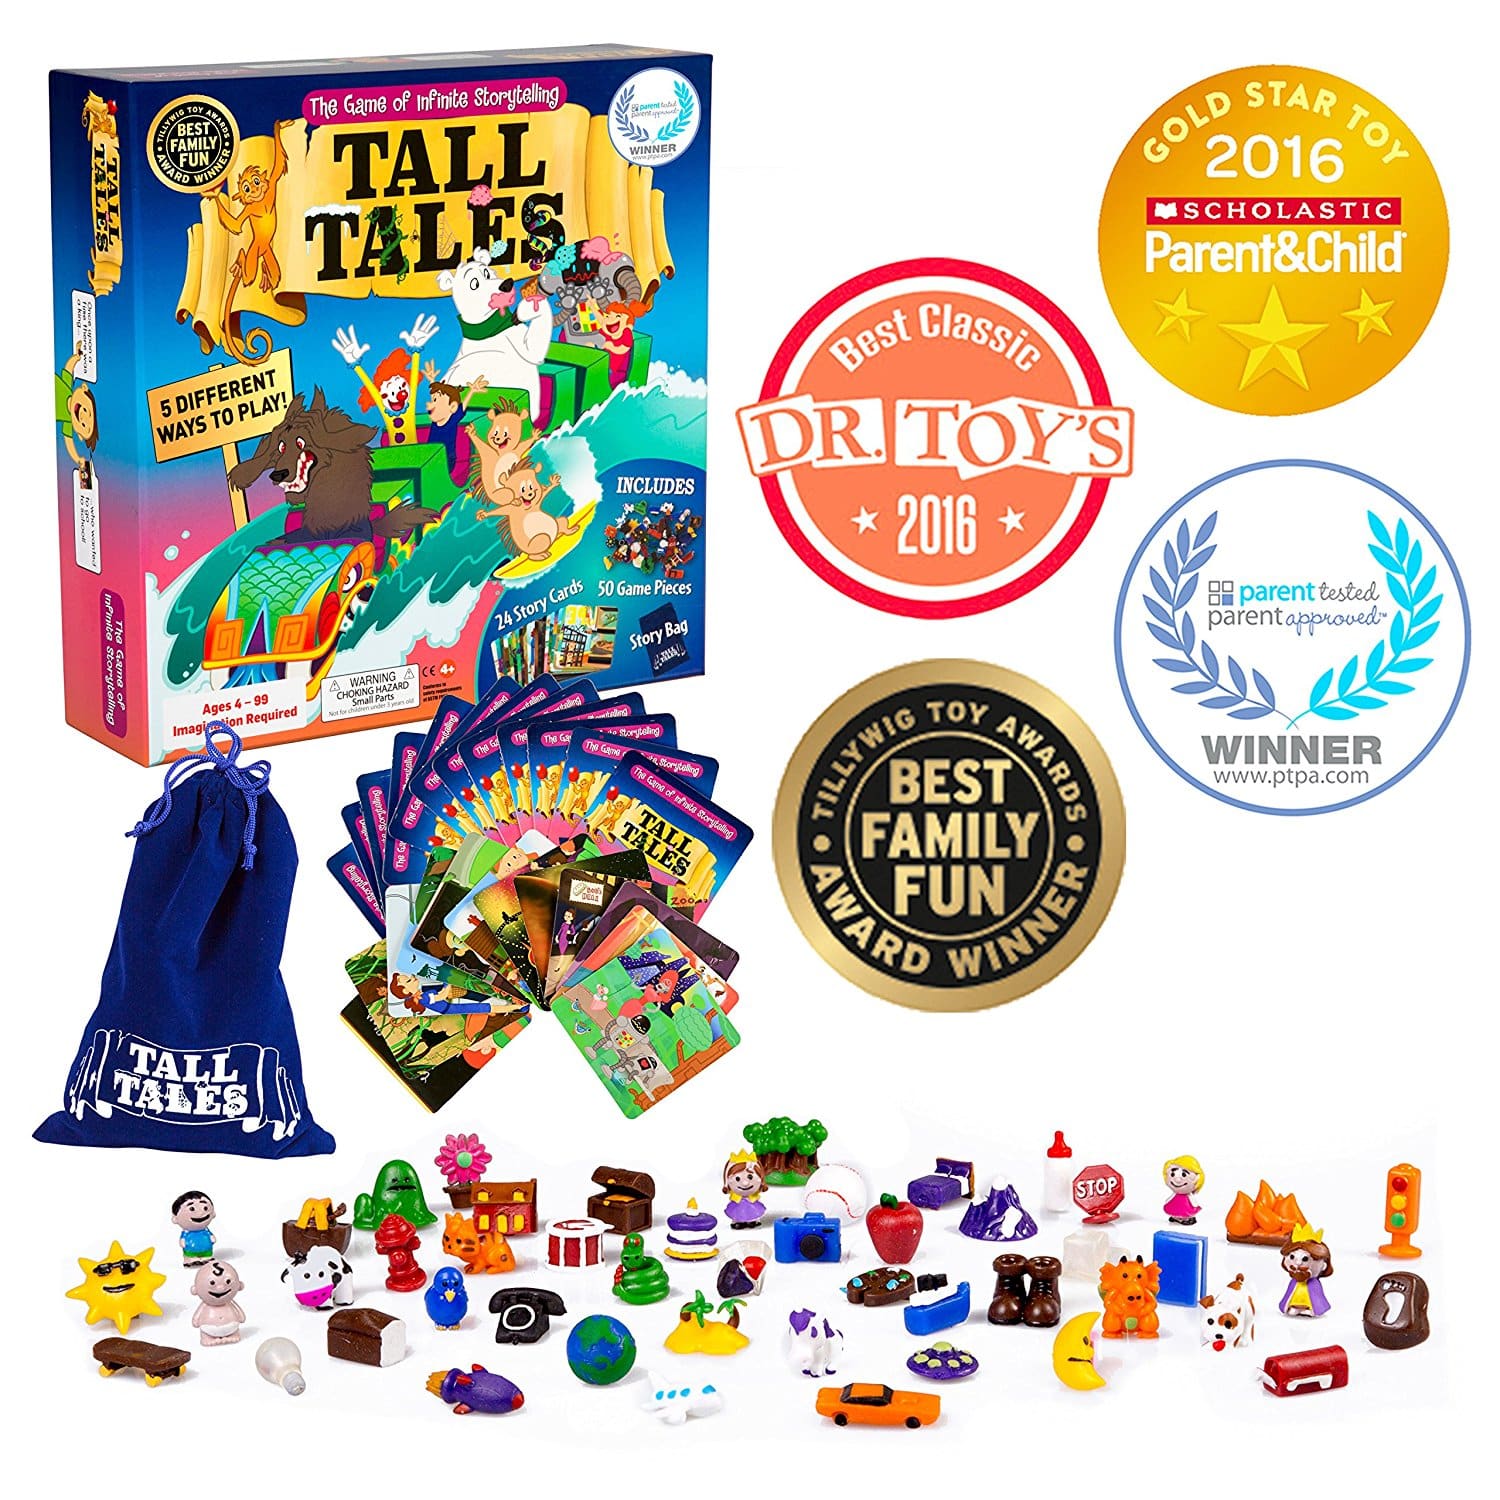 LIGHTNING DEAL ALERT! Tall Tales Story Telling Board Game – 43% off!